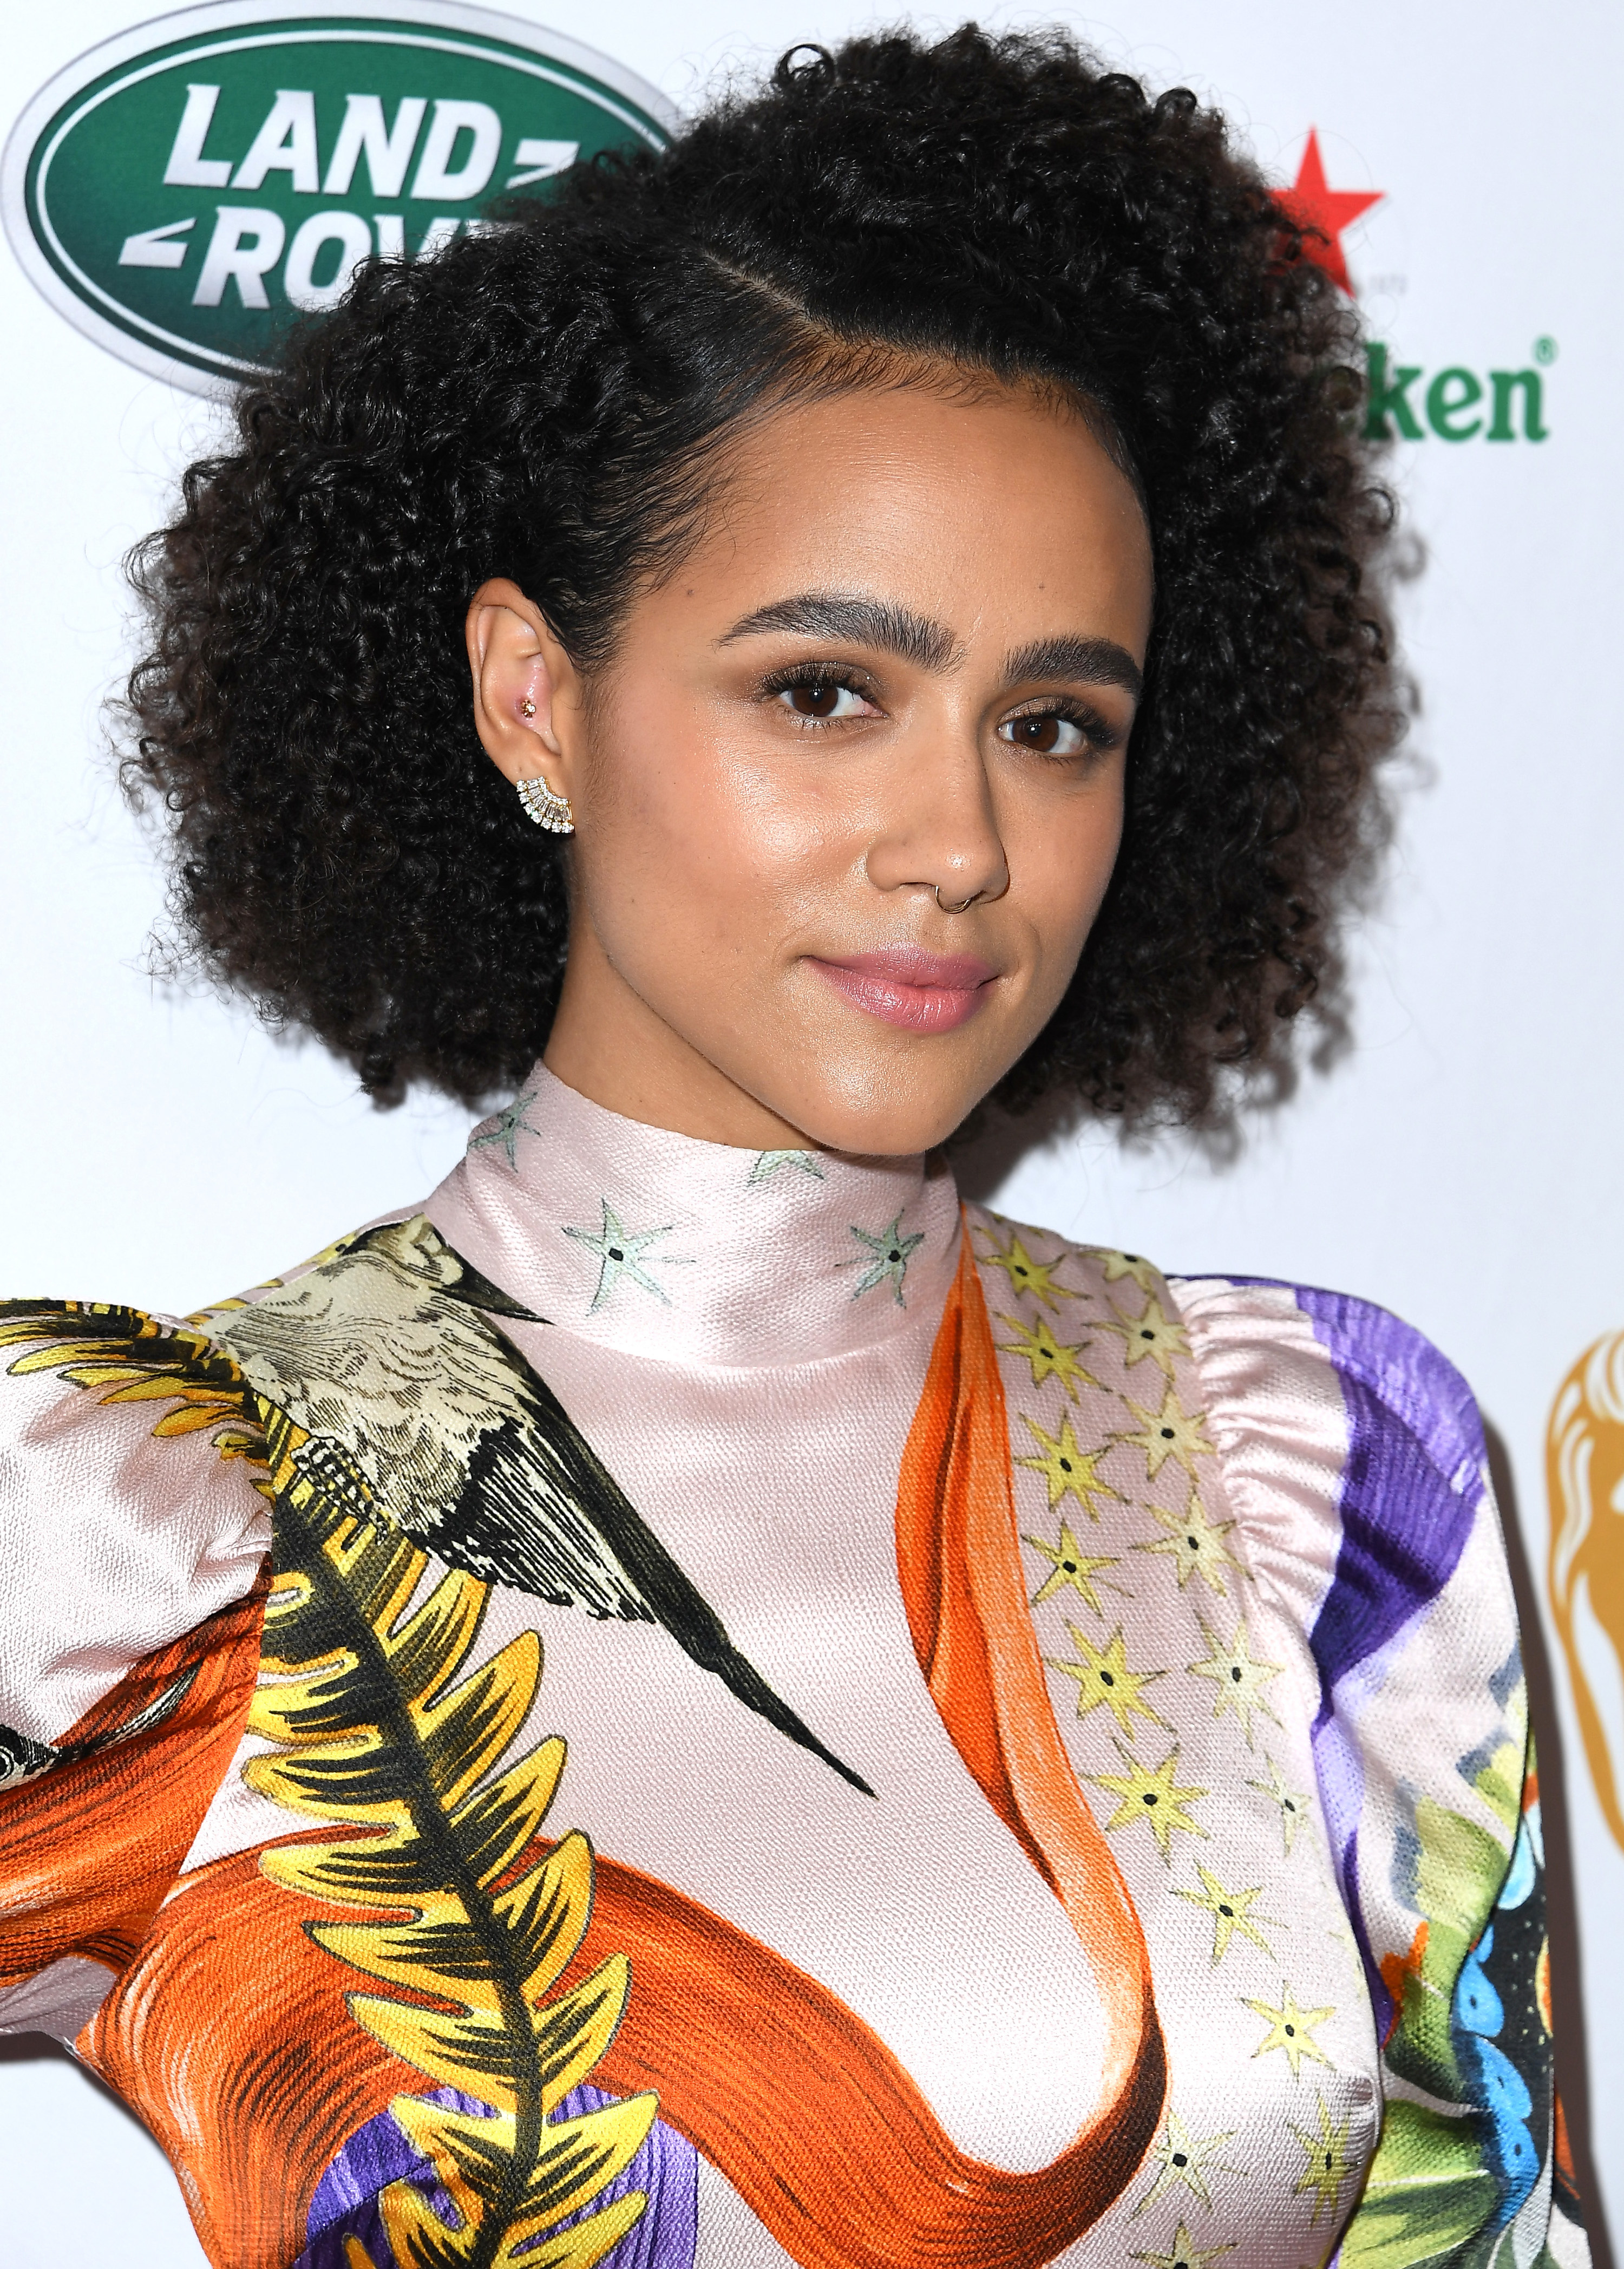 Nathalie Emmanuel arrives at the BAFTA Los Angeles + BBC America TV Tea Party 2019 at The Beverly Hilton Hotel on September 21, 2019, in Beverly Hills, California